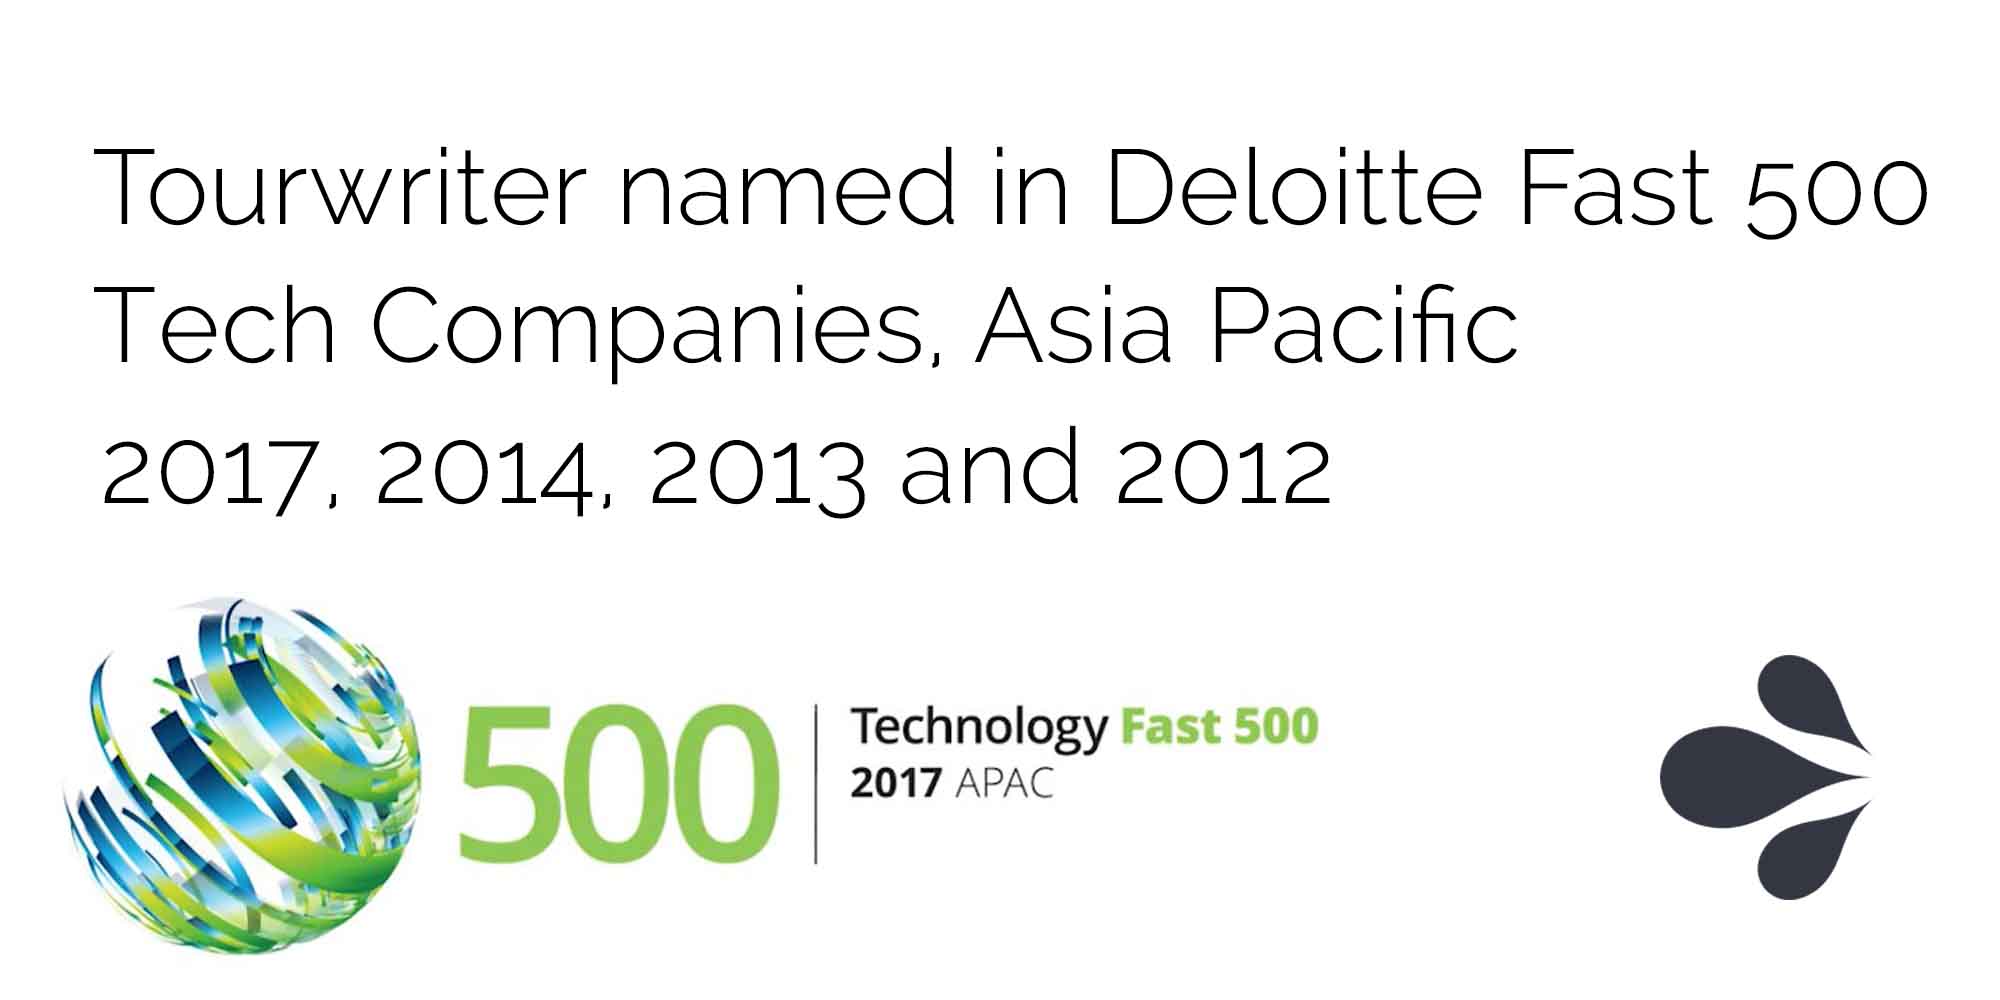 Tourwriter and Deloitte Fast 500 Index